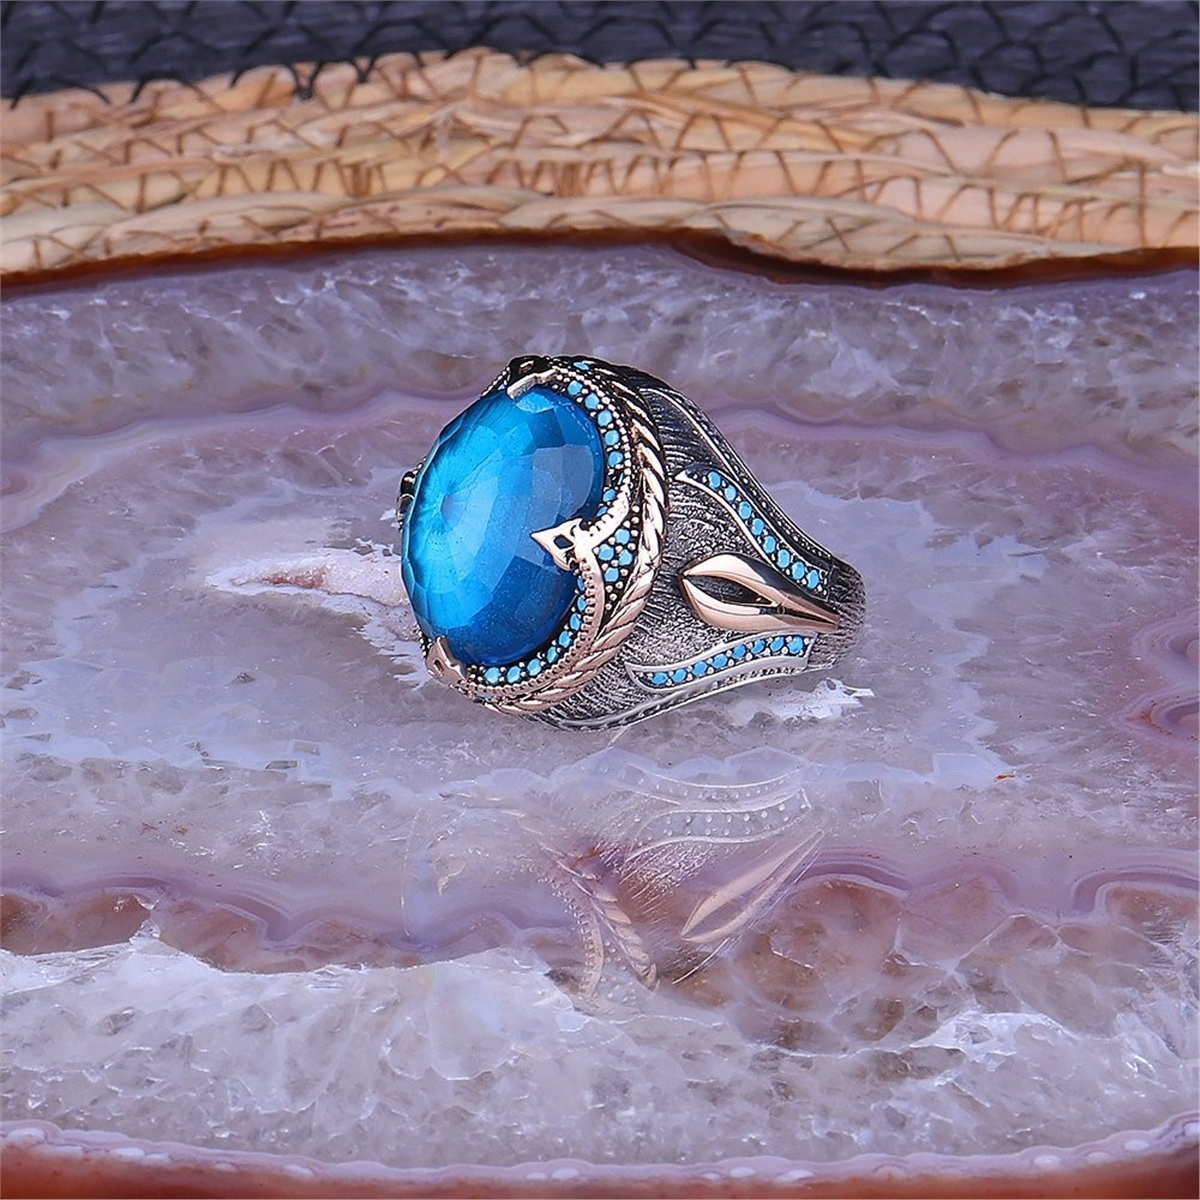 Relief Patterned Blue Topaz Stone 925 Sterling Silver Men's Ring